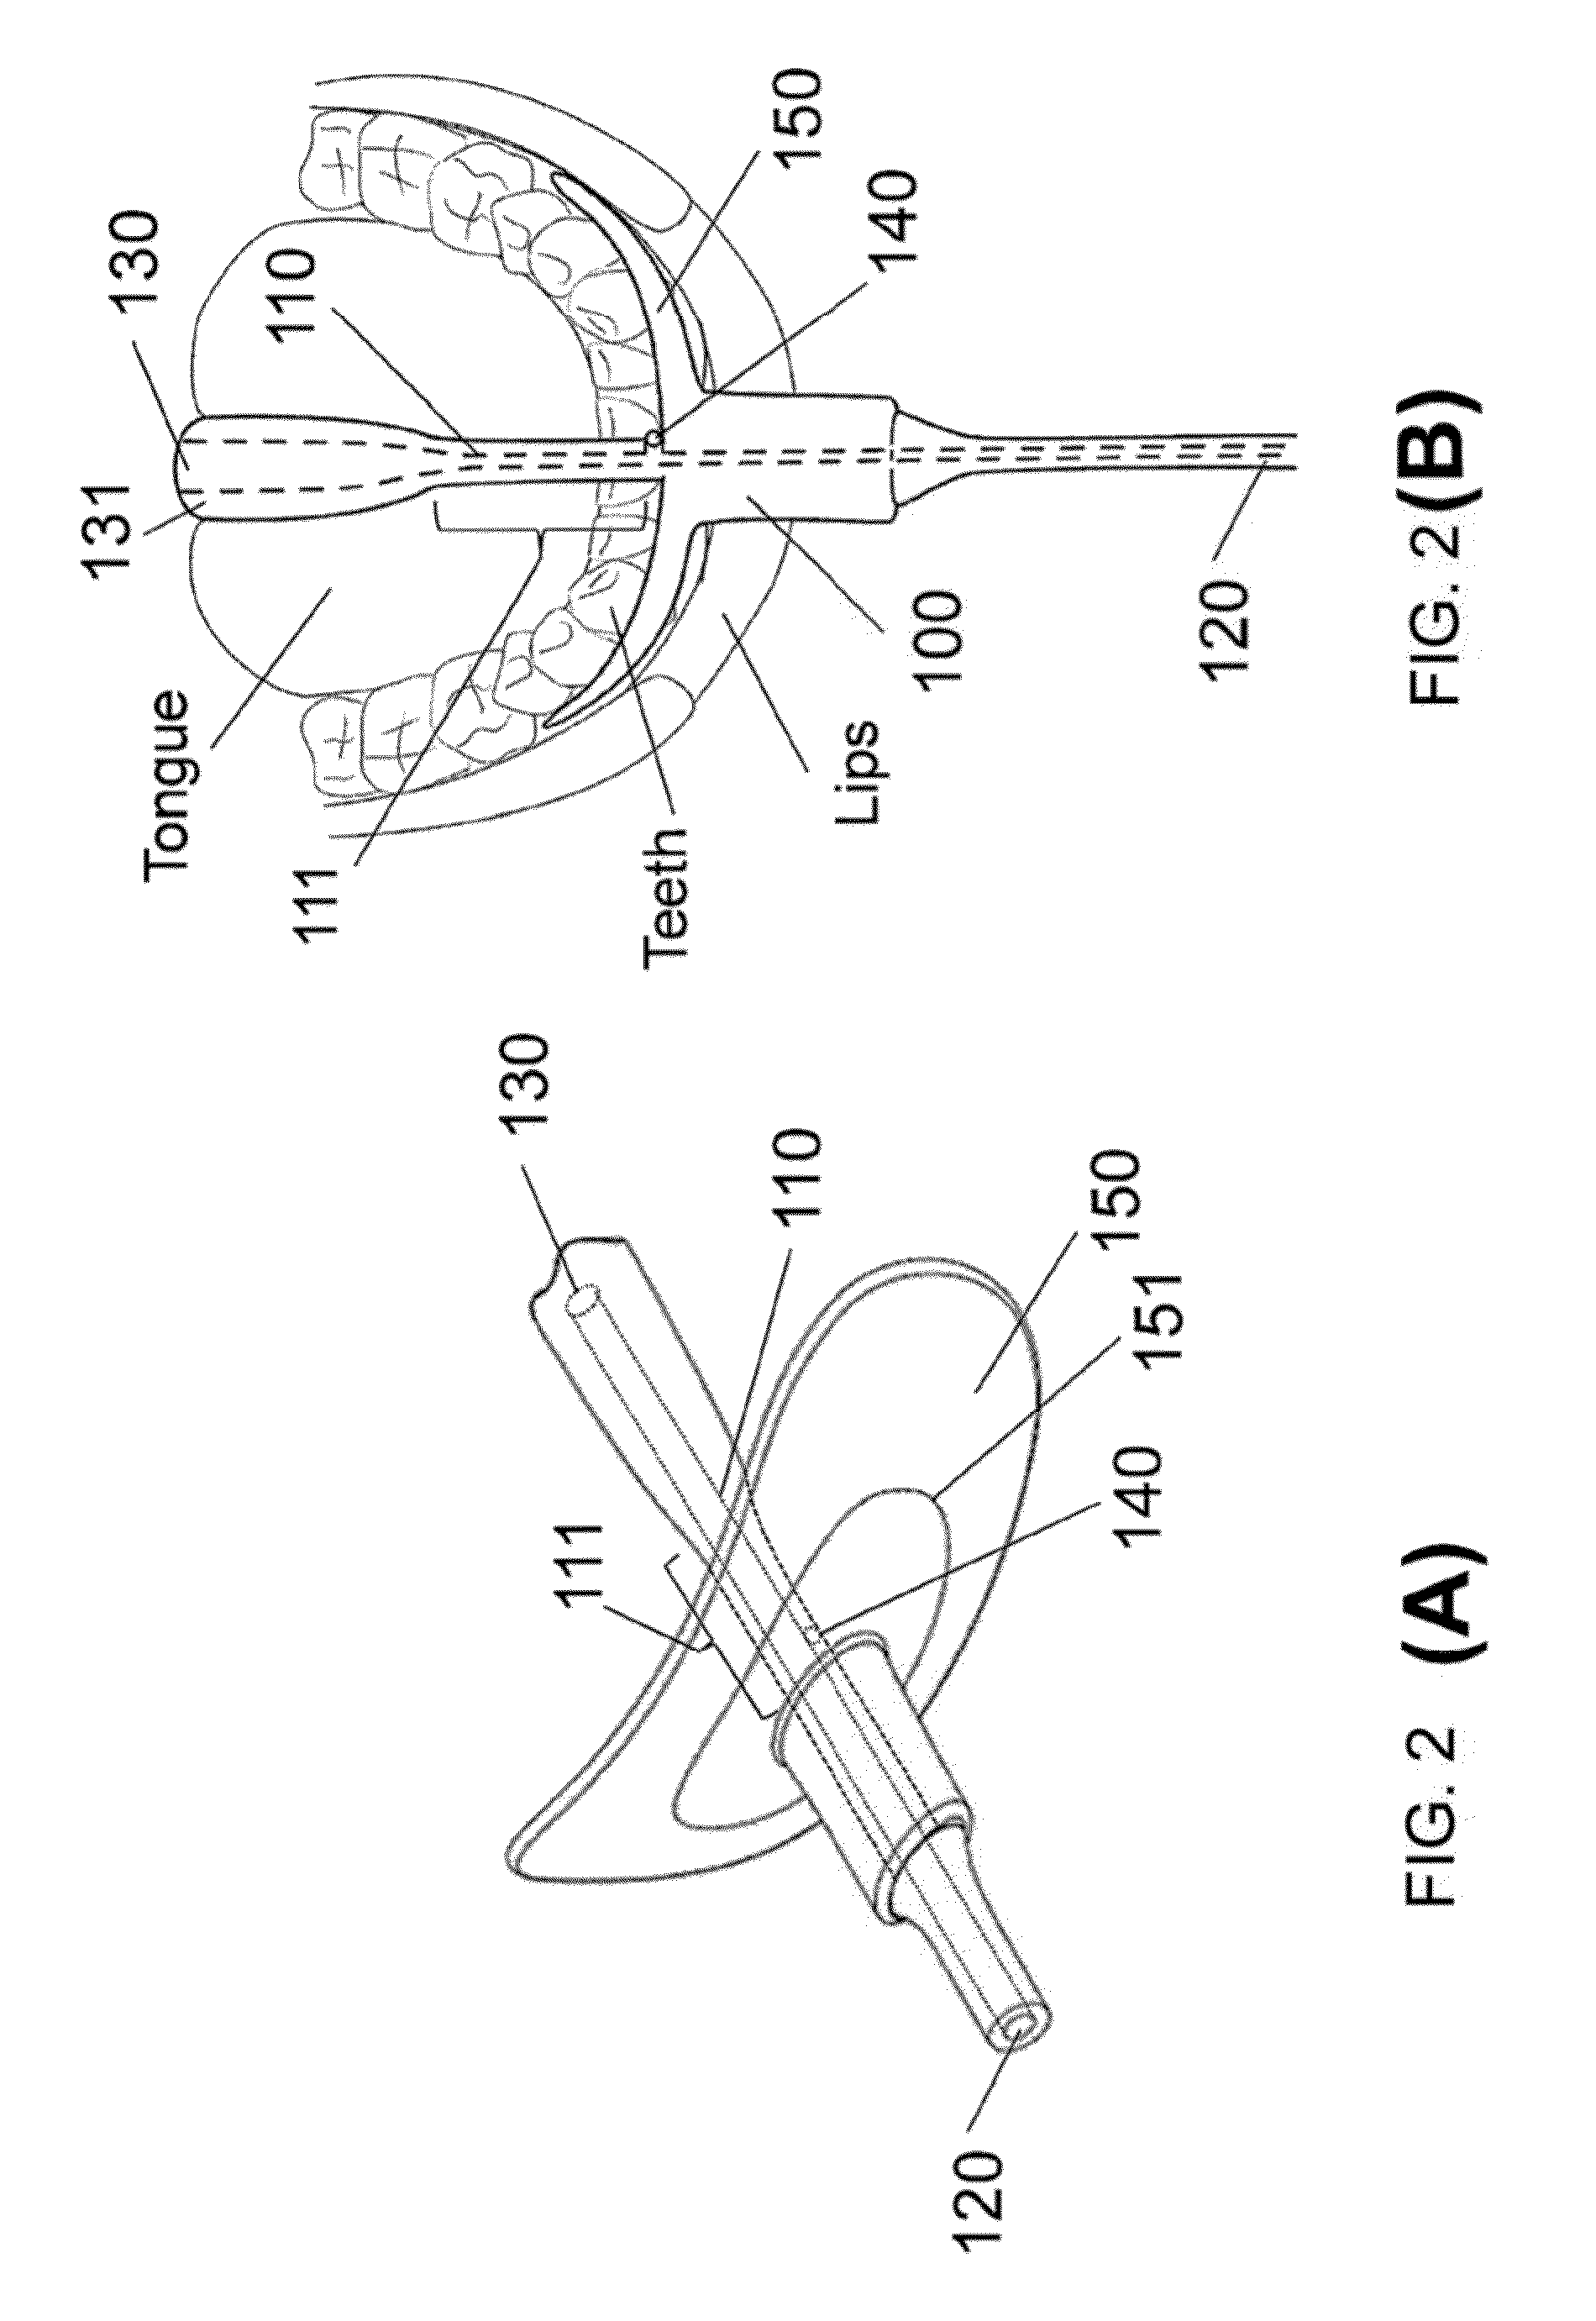 Oral device to eliminate air space in oral cavity